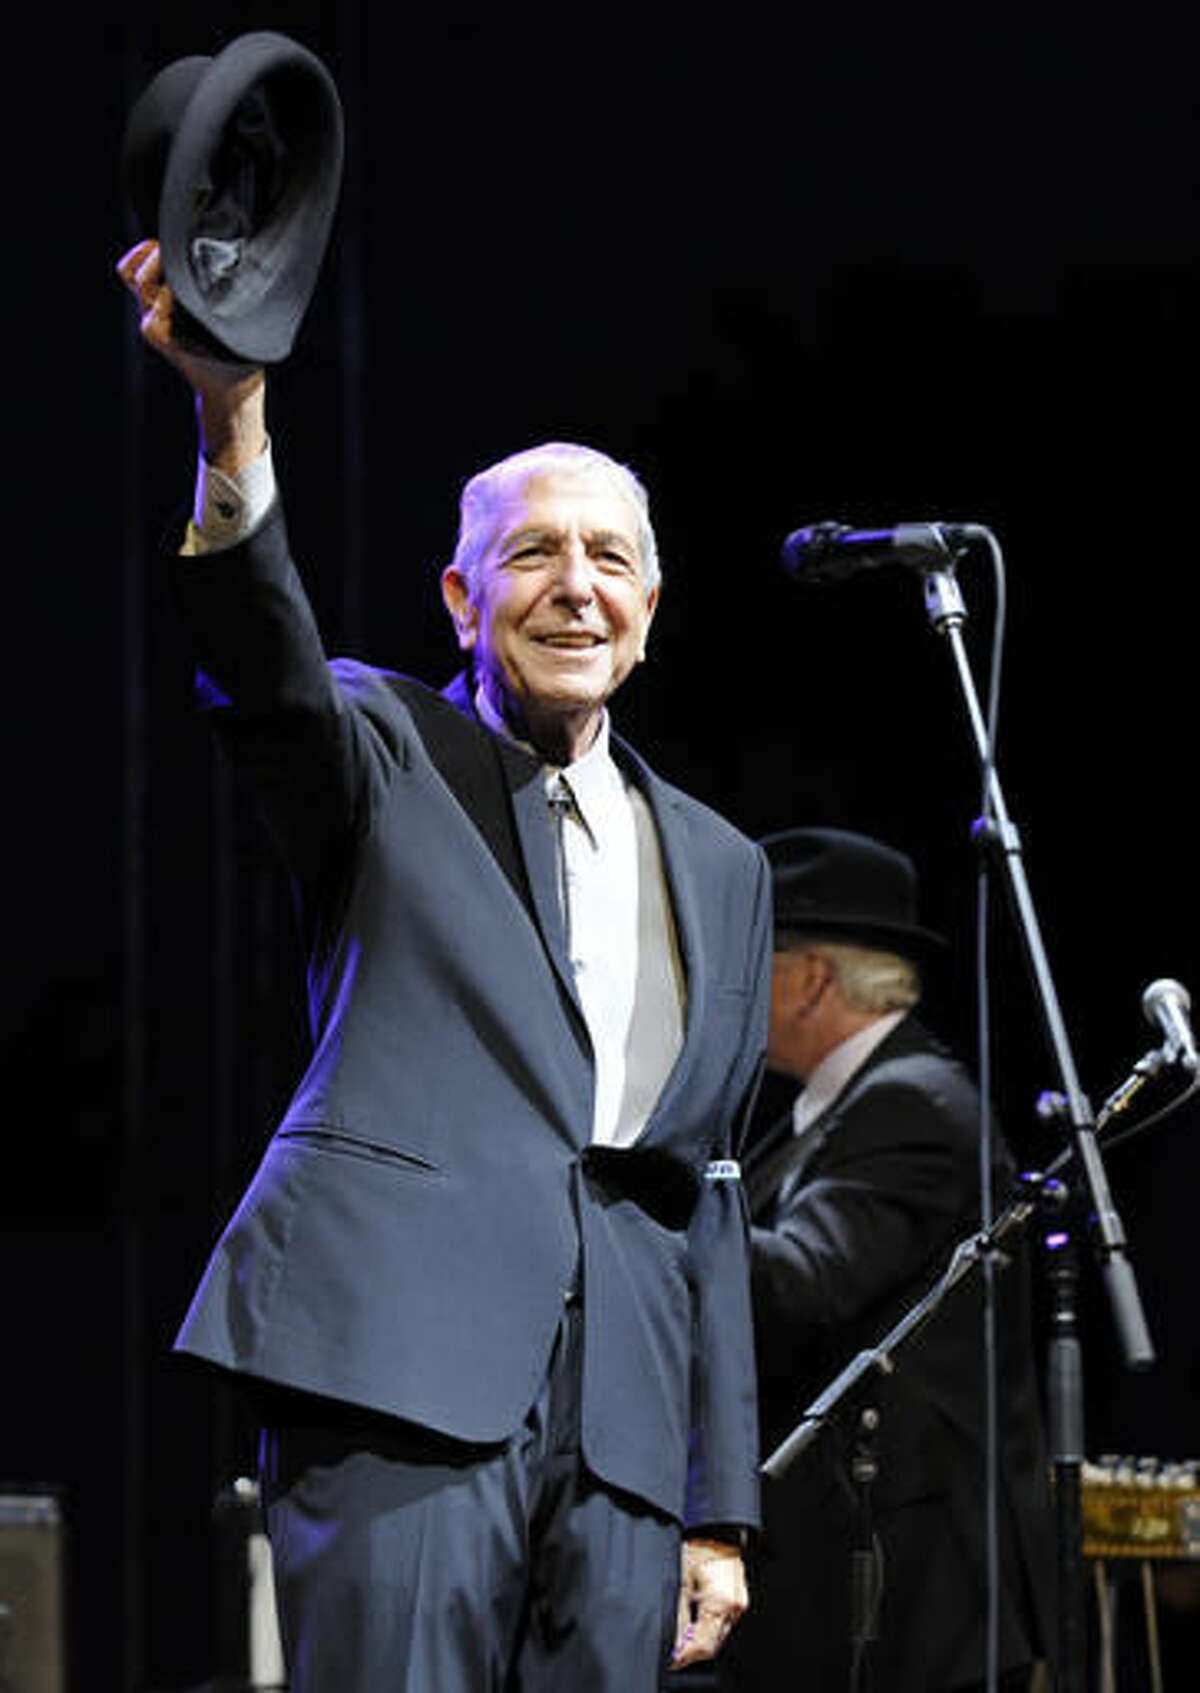 CORRECTS DATE OF STATEMENT - FILE - In this April 17, 2009, file photo, Leonard Cohen salutes the crowd during his performance on the first day of the Coachella Valley Music & Arts Festival in Indio, Calif. Cohen, the gravelly-voiced Canadian singer-songwriter of hits like “Hallelujah,” "Suzanne” and "Bird on a Wire," has died, his management said in a statement Thursday, Nov. 10, 2016. He was 82. (AP Photo/Chris Pizzello)